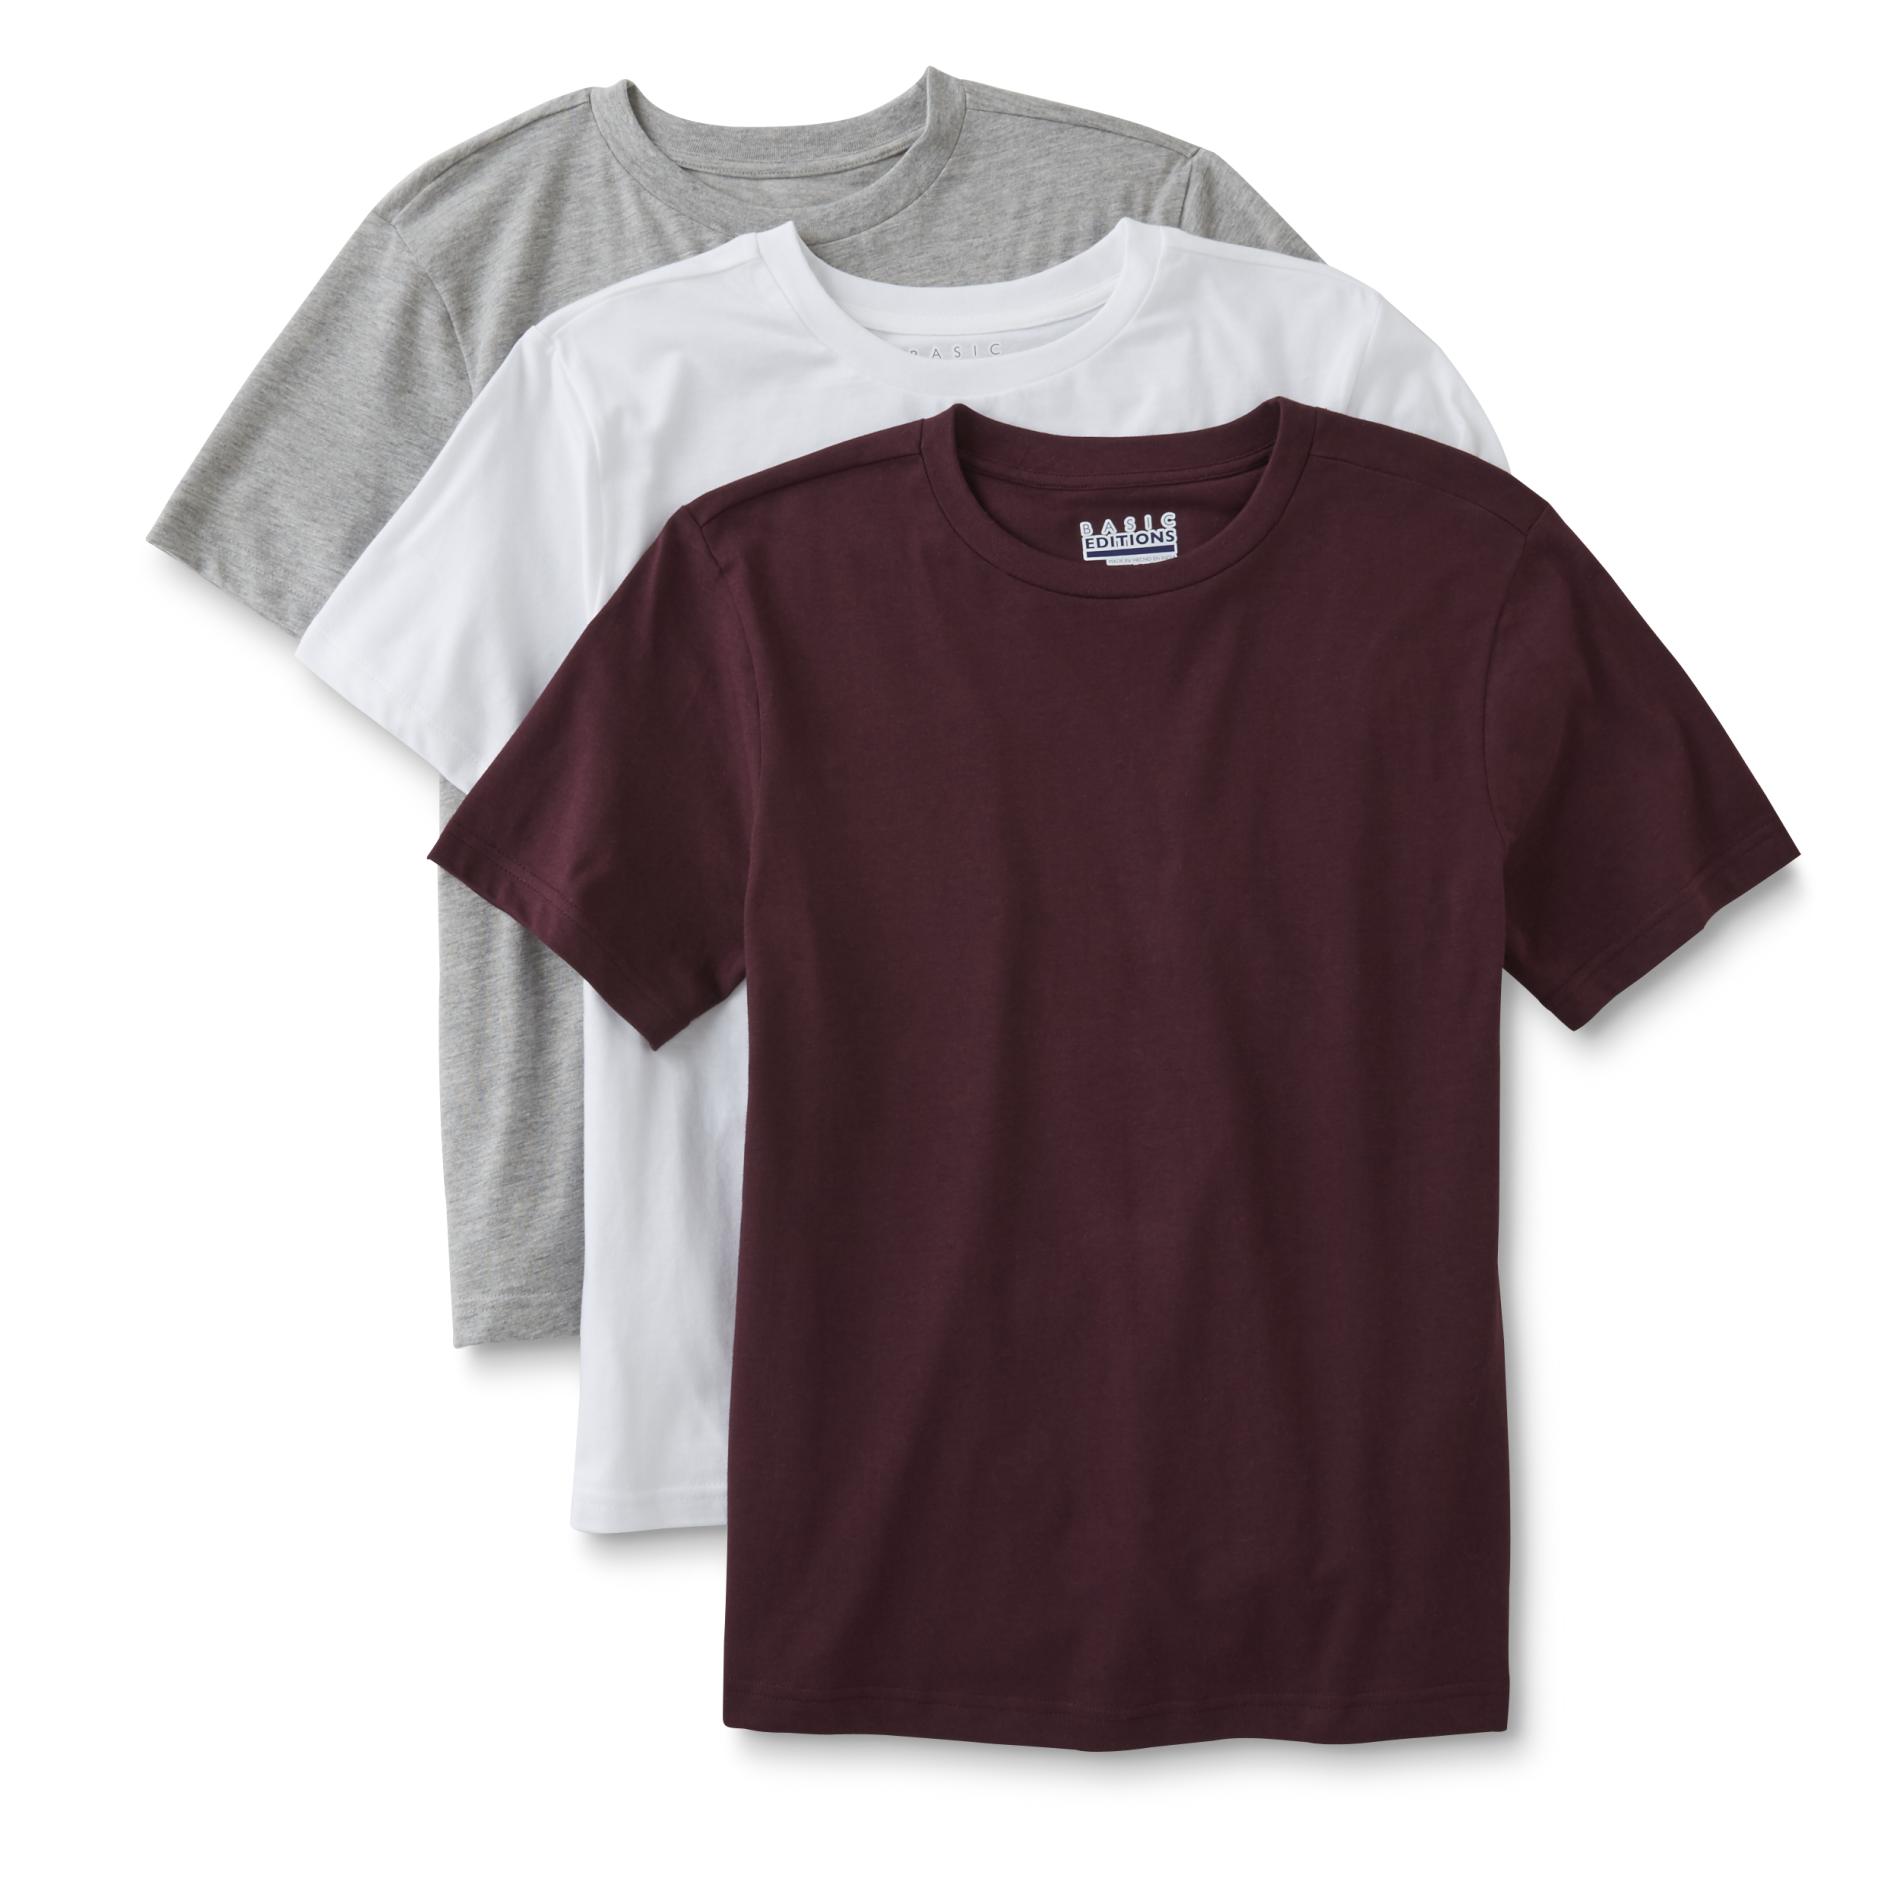 Basic Editions Boys' 3-Pack Crew Neck T-Shirts